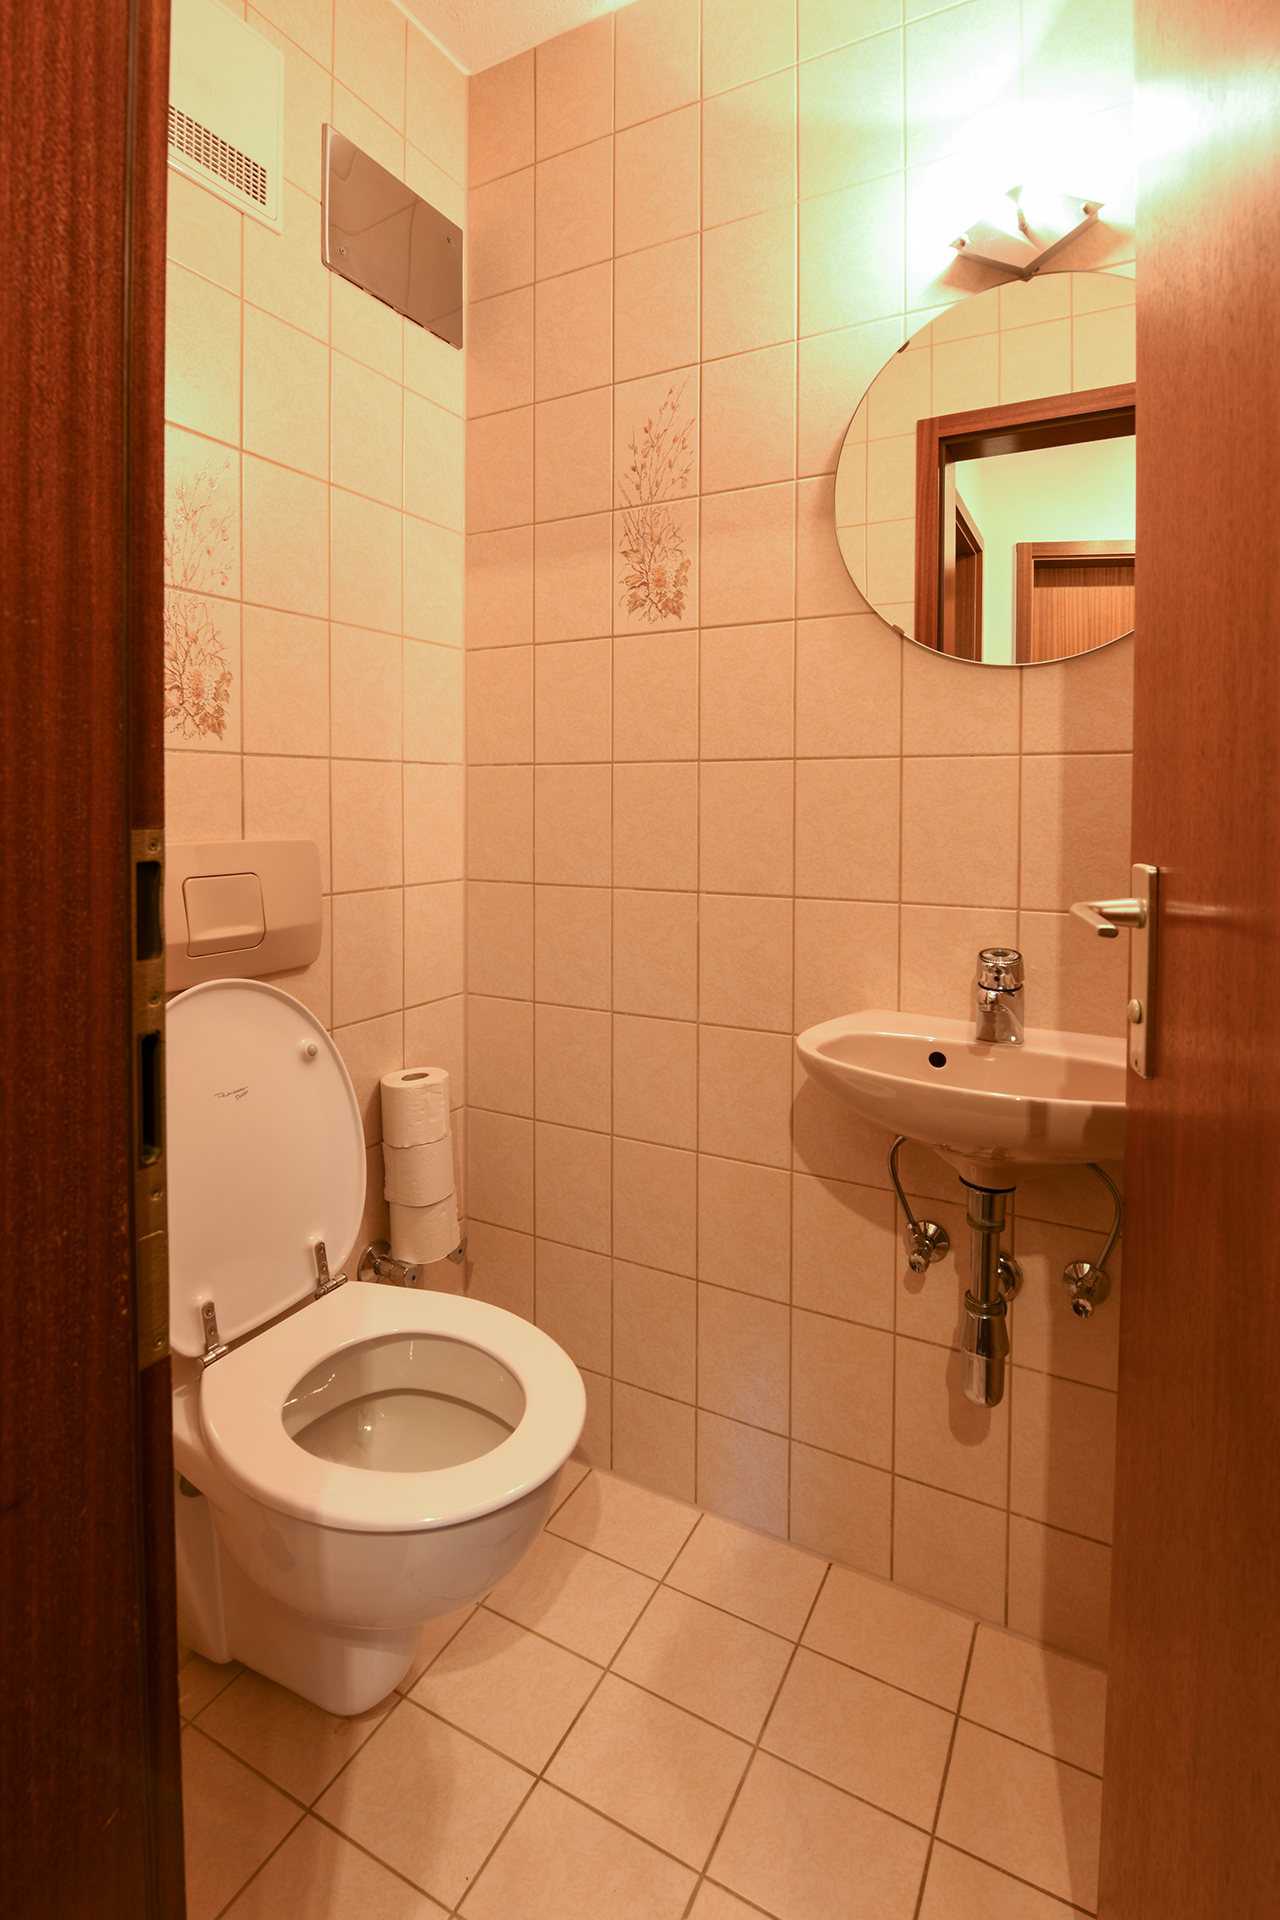 Holiday apartments on Lake Constance: Immenstaad 1 - Lavatory